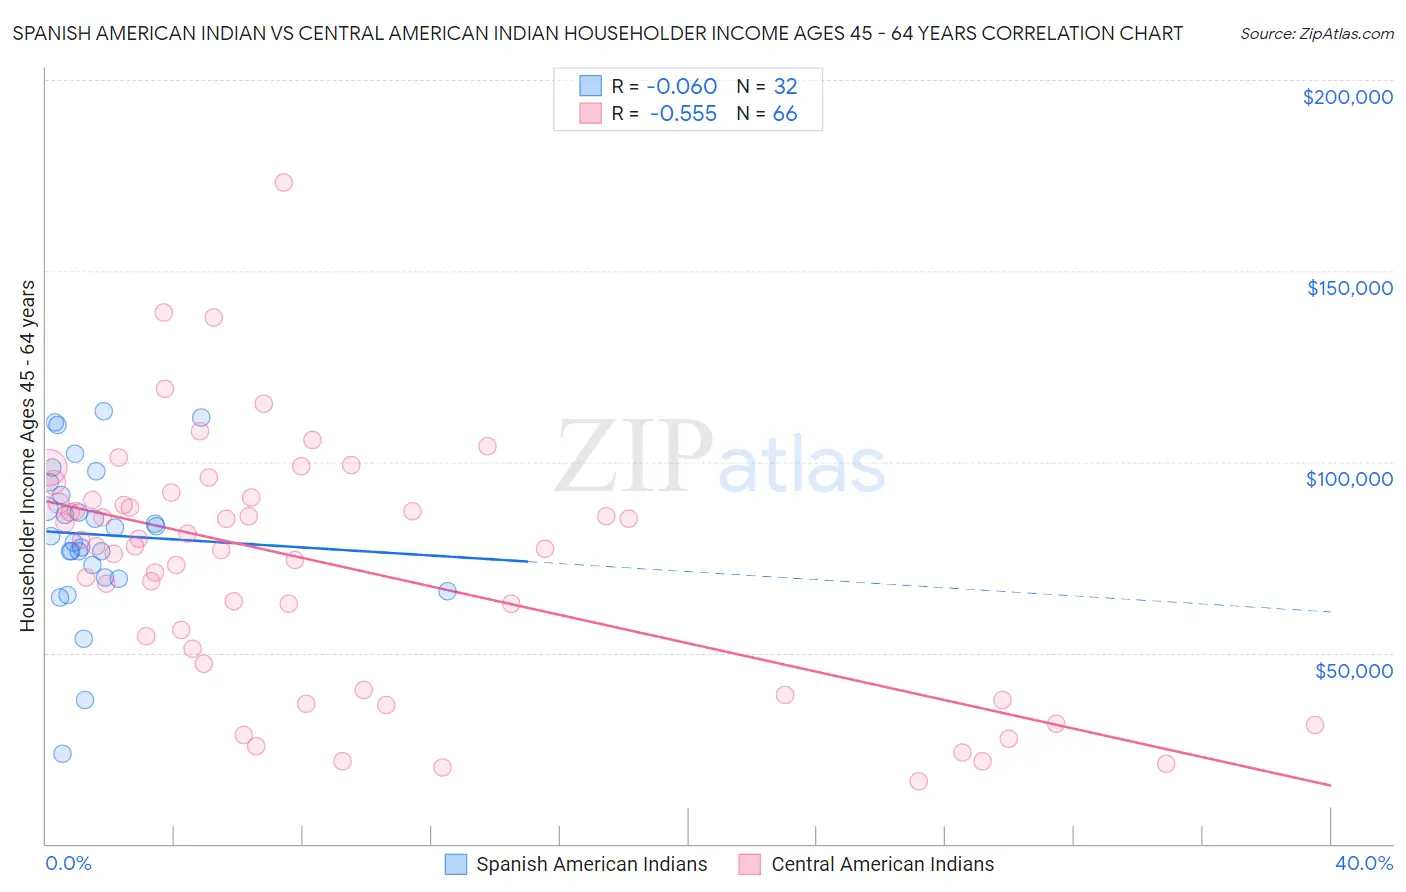 Spanish American Indian vs Central American Indian Householder Income Ages 45 - 64 years